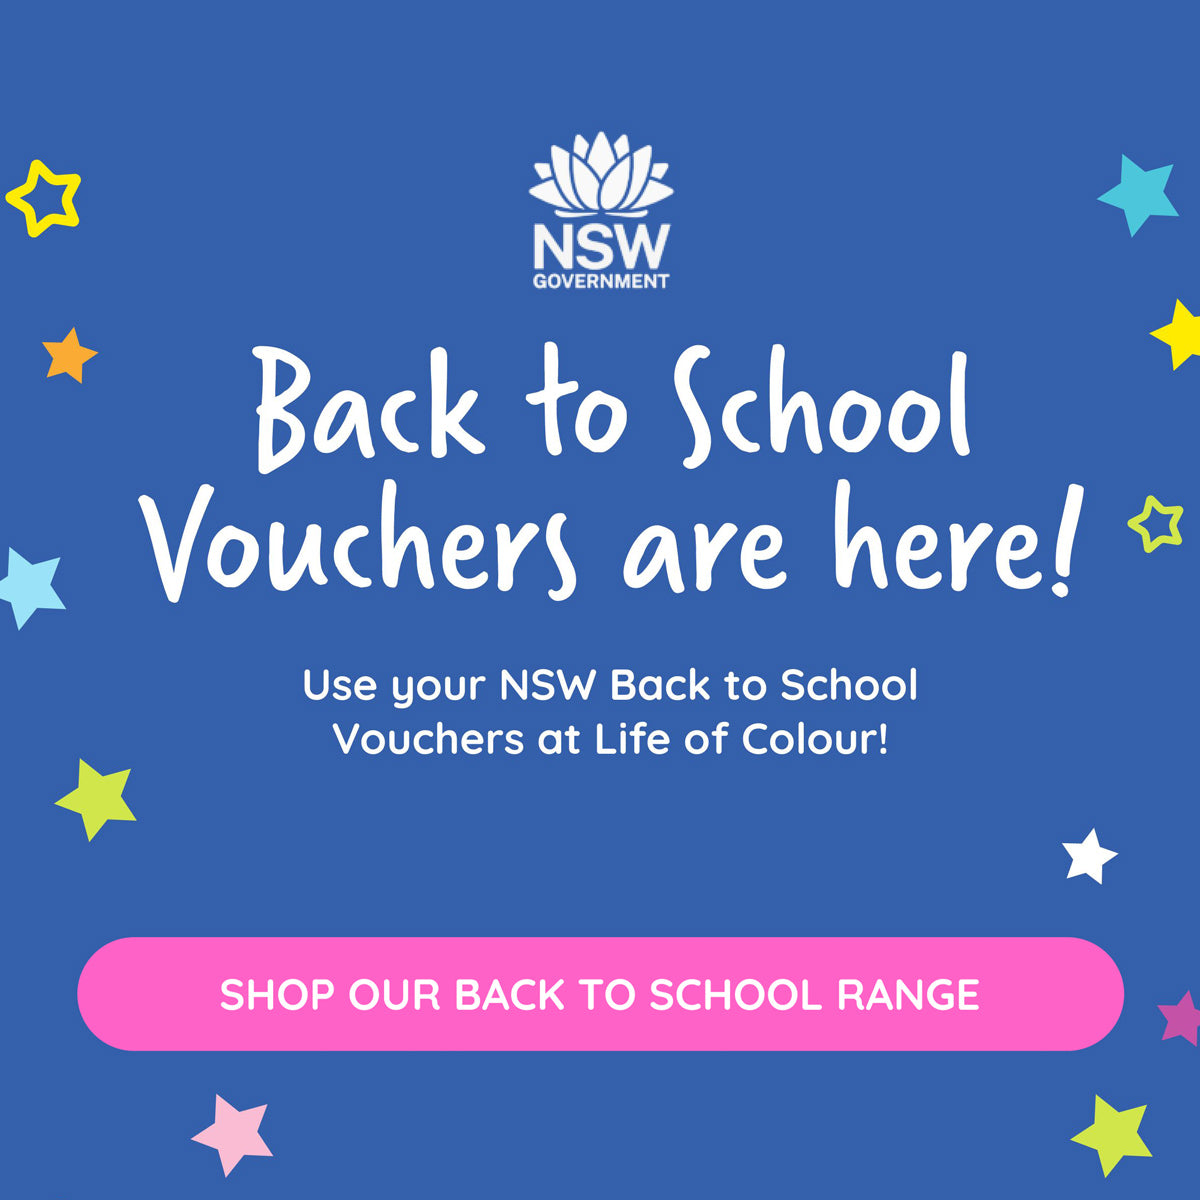 Shop with your Back to School Vouchers at Life of Colour